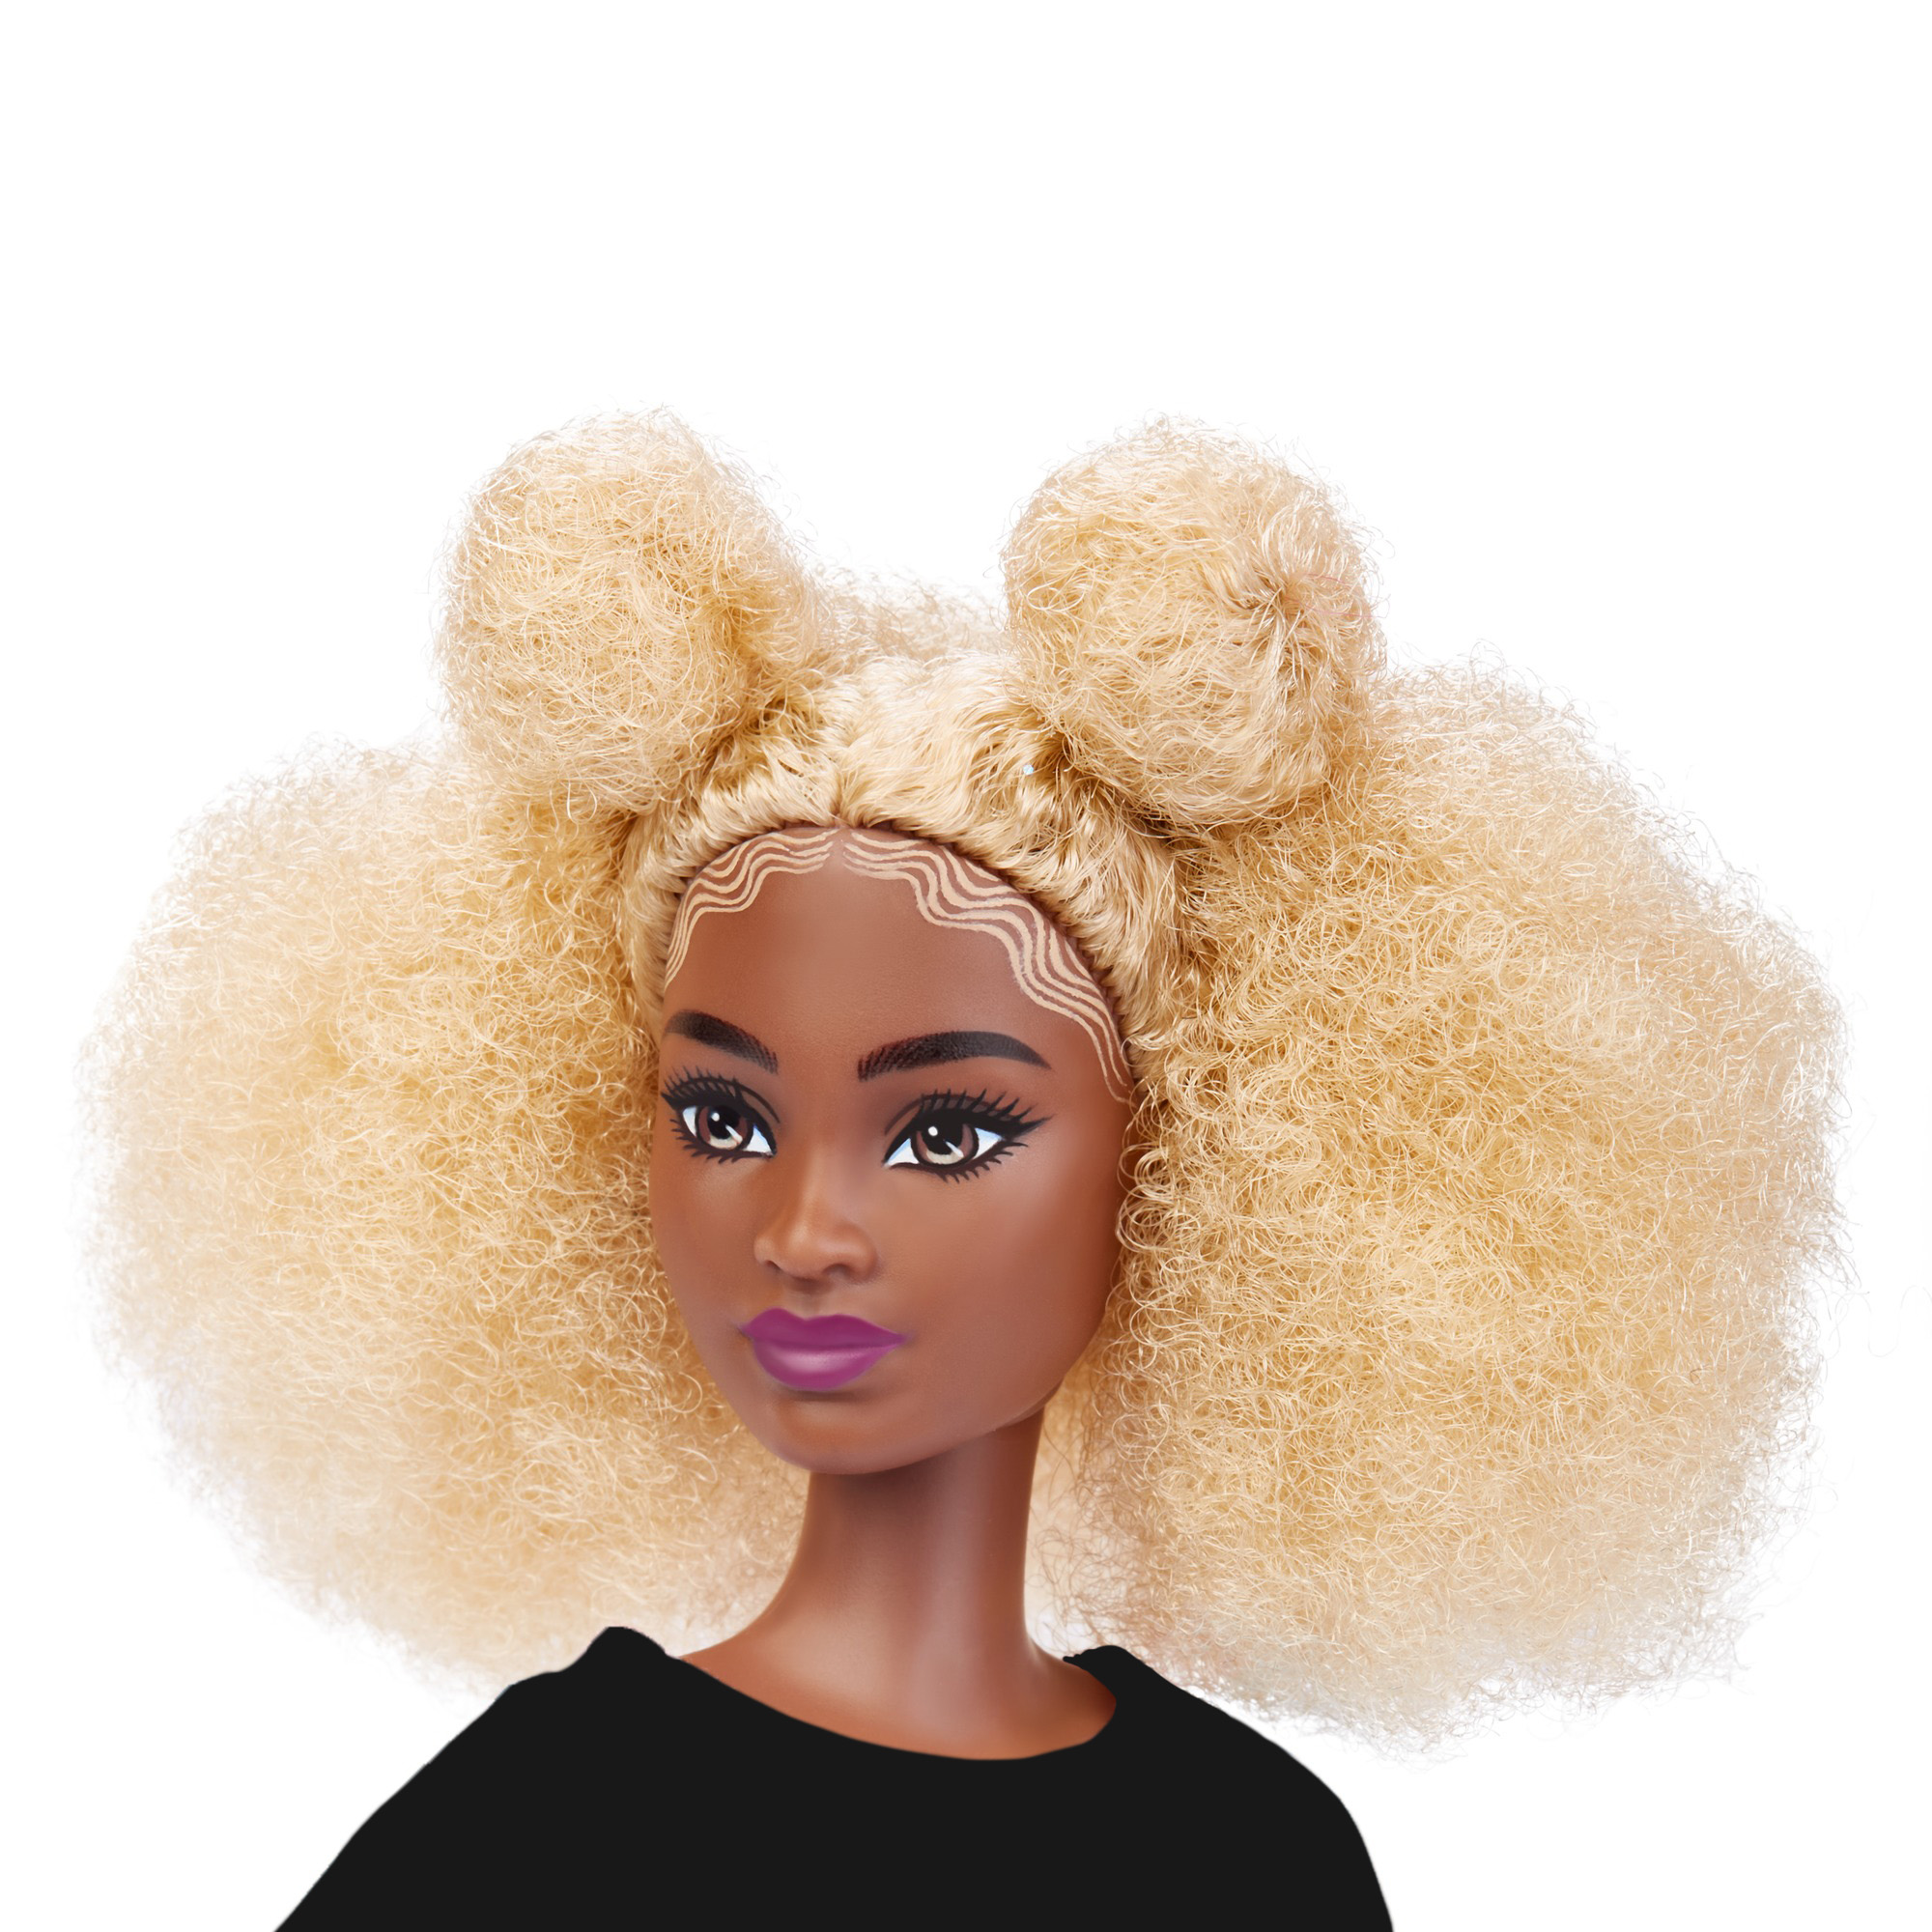 Barbie Styled By You con capelli biondi afro - Barbie